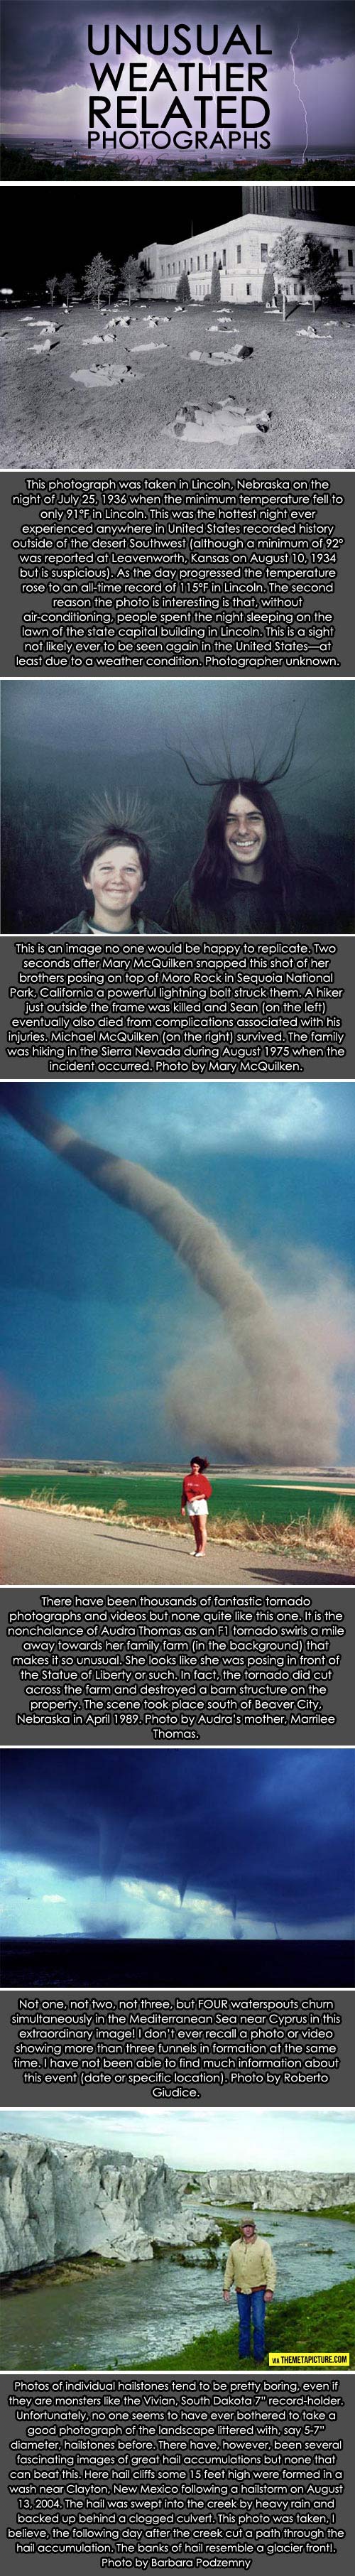 Unusual weather related photographs...